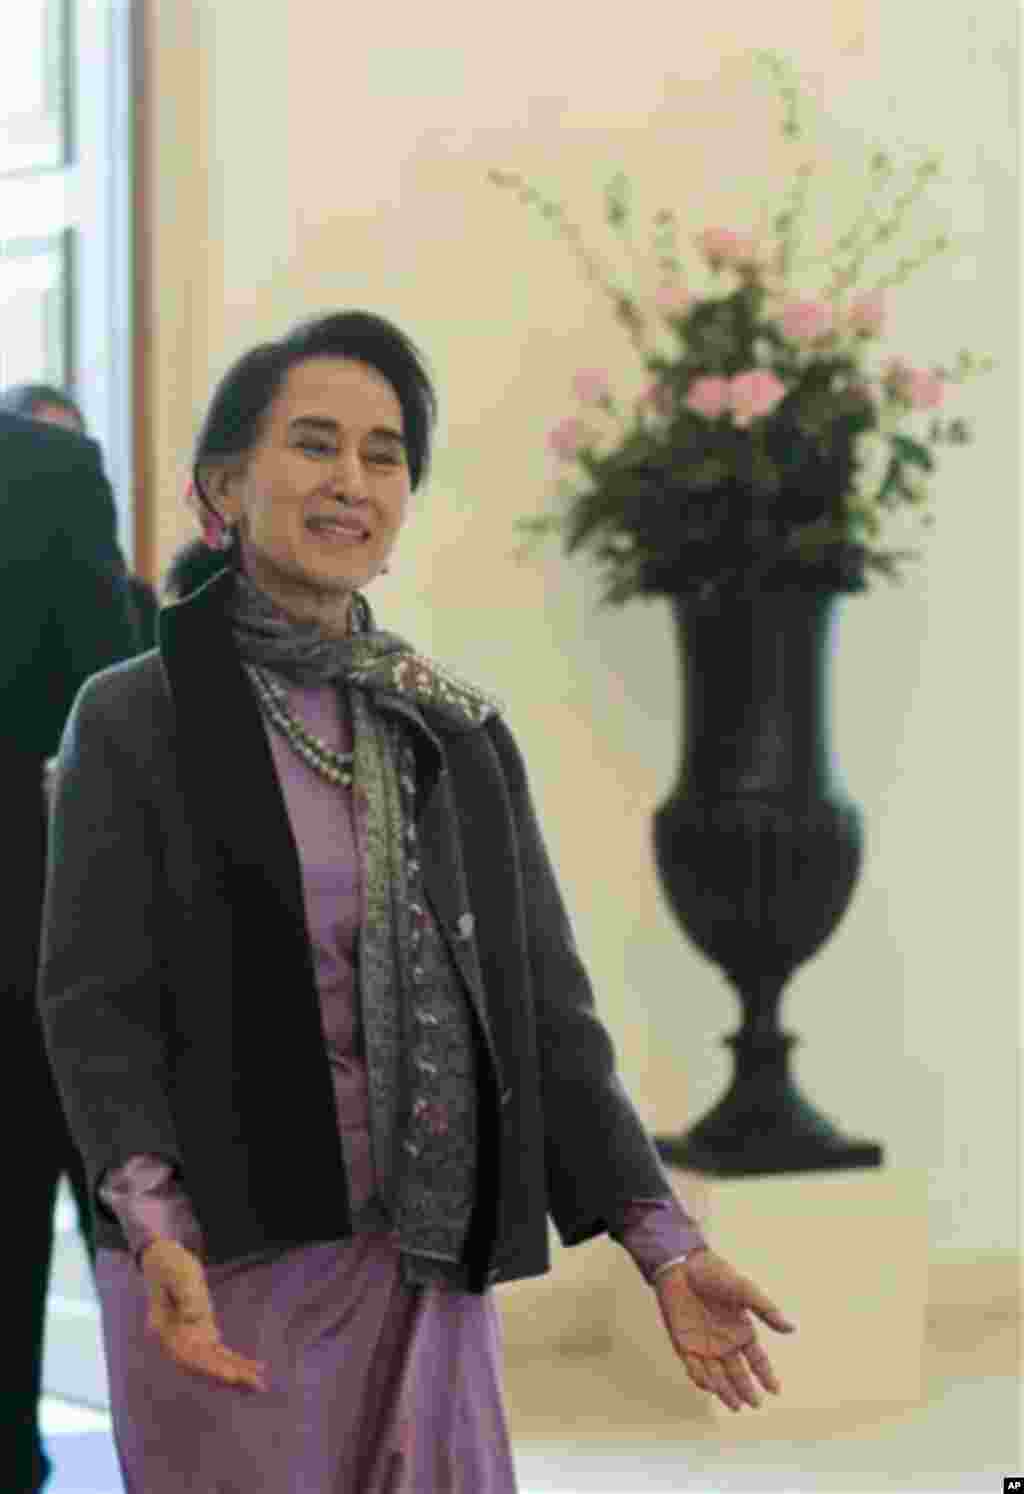 Myanmar Opposition Leader Aung San Suu Kyi arrives for meeting with German President Joachim Gauck at his residence, the Bellevue Palace in Berlin, Germany, Thursday, April 10, 2014. (AP Photo/Markus Schreiber)